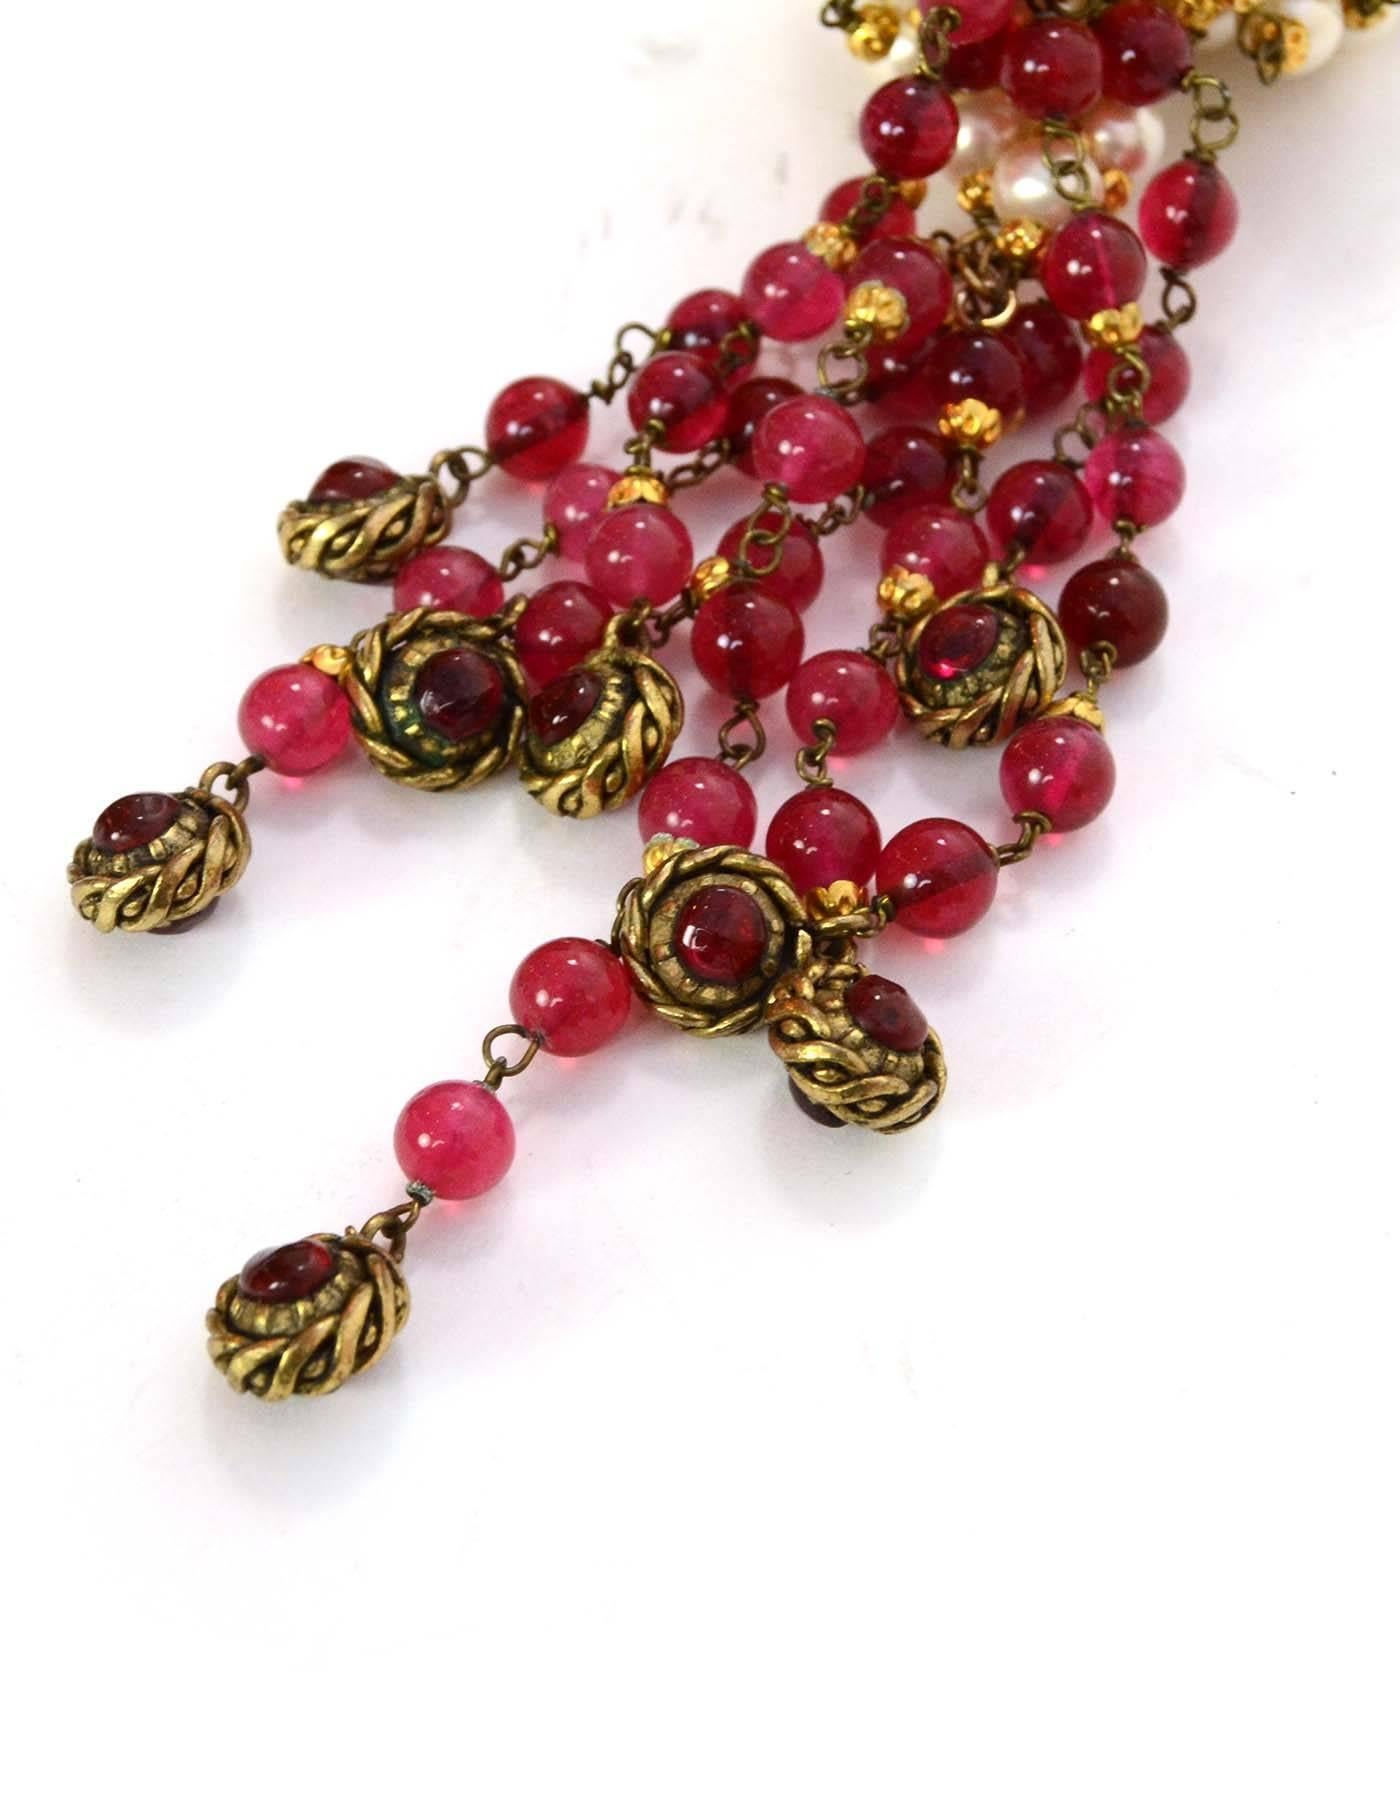 Women's CHANEL Three Strand Long Faux Pearl Lariat Necklace W. Red Gripoix Beads 1984